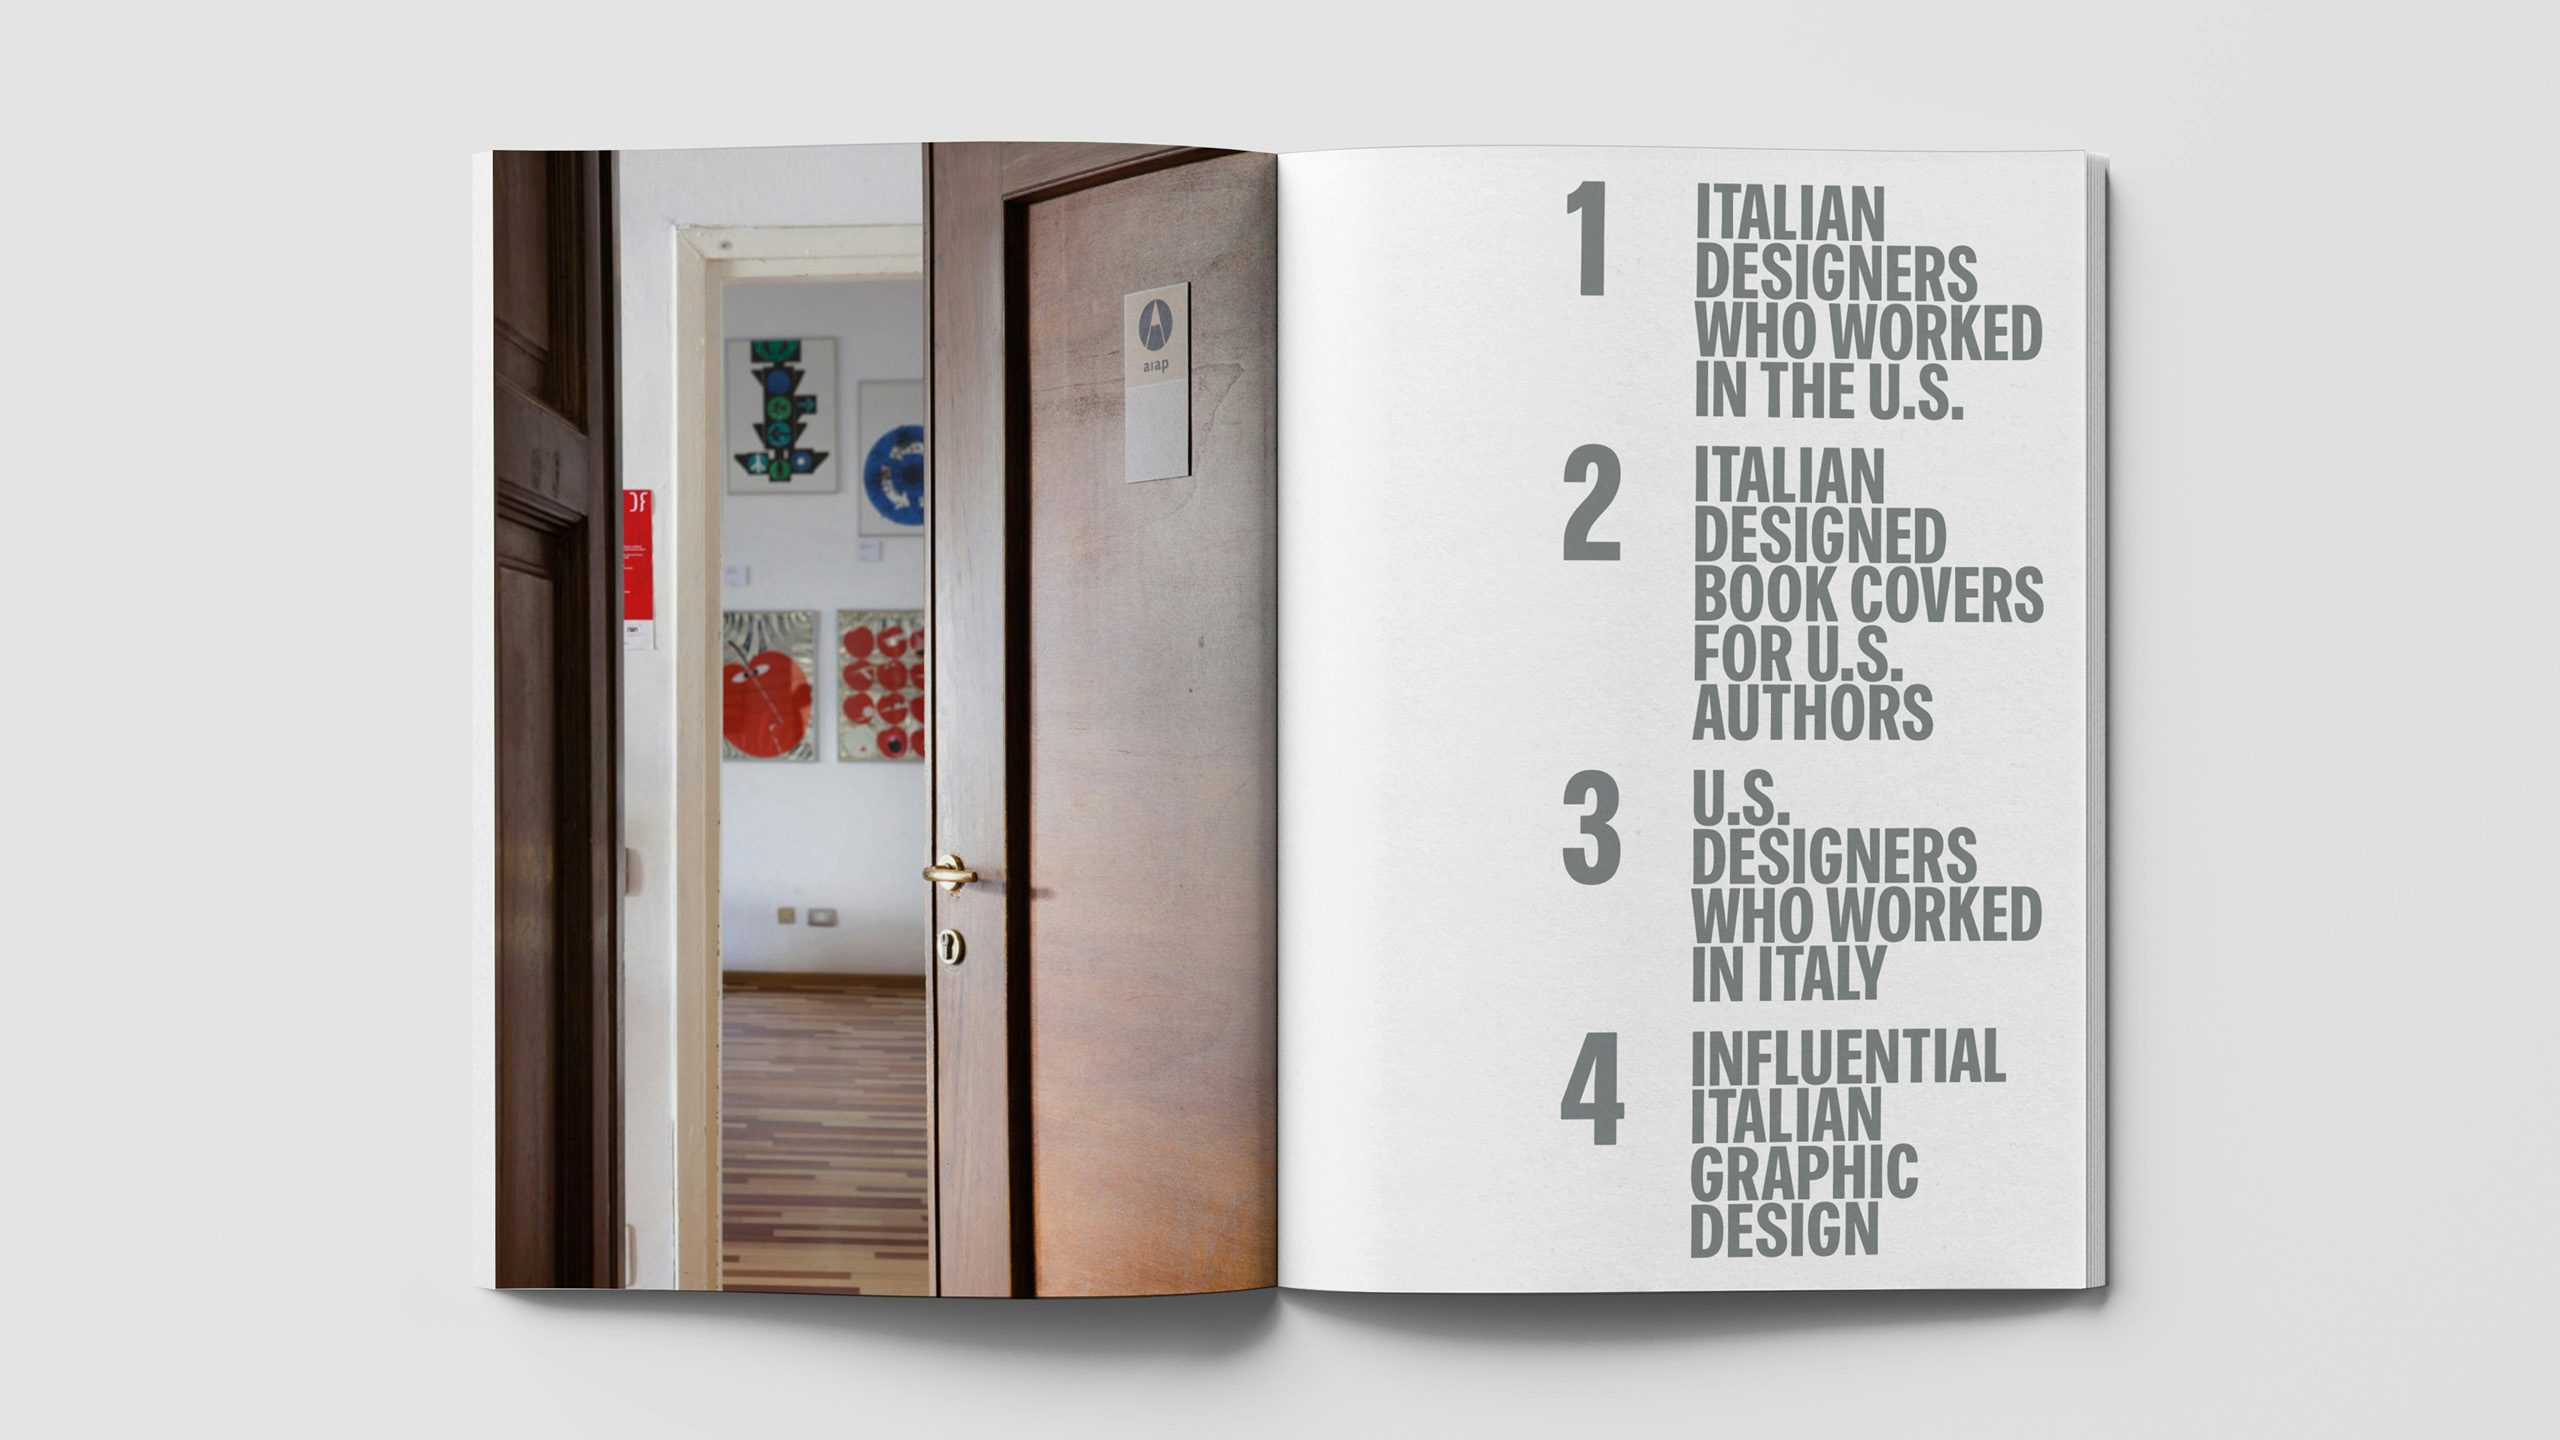 Spread from the book Made in Italy featuring a photo of an open door leading into a room with posters on the wall in the background on the left hand page, and a contents page on the right